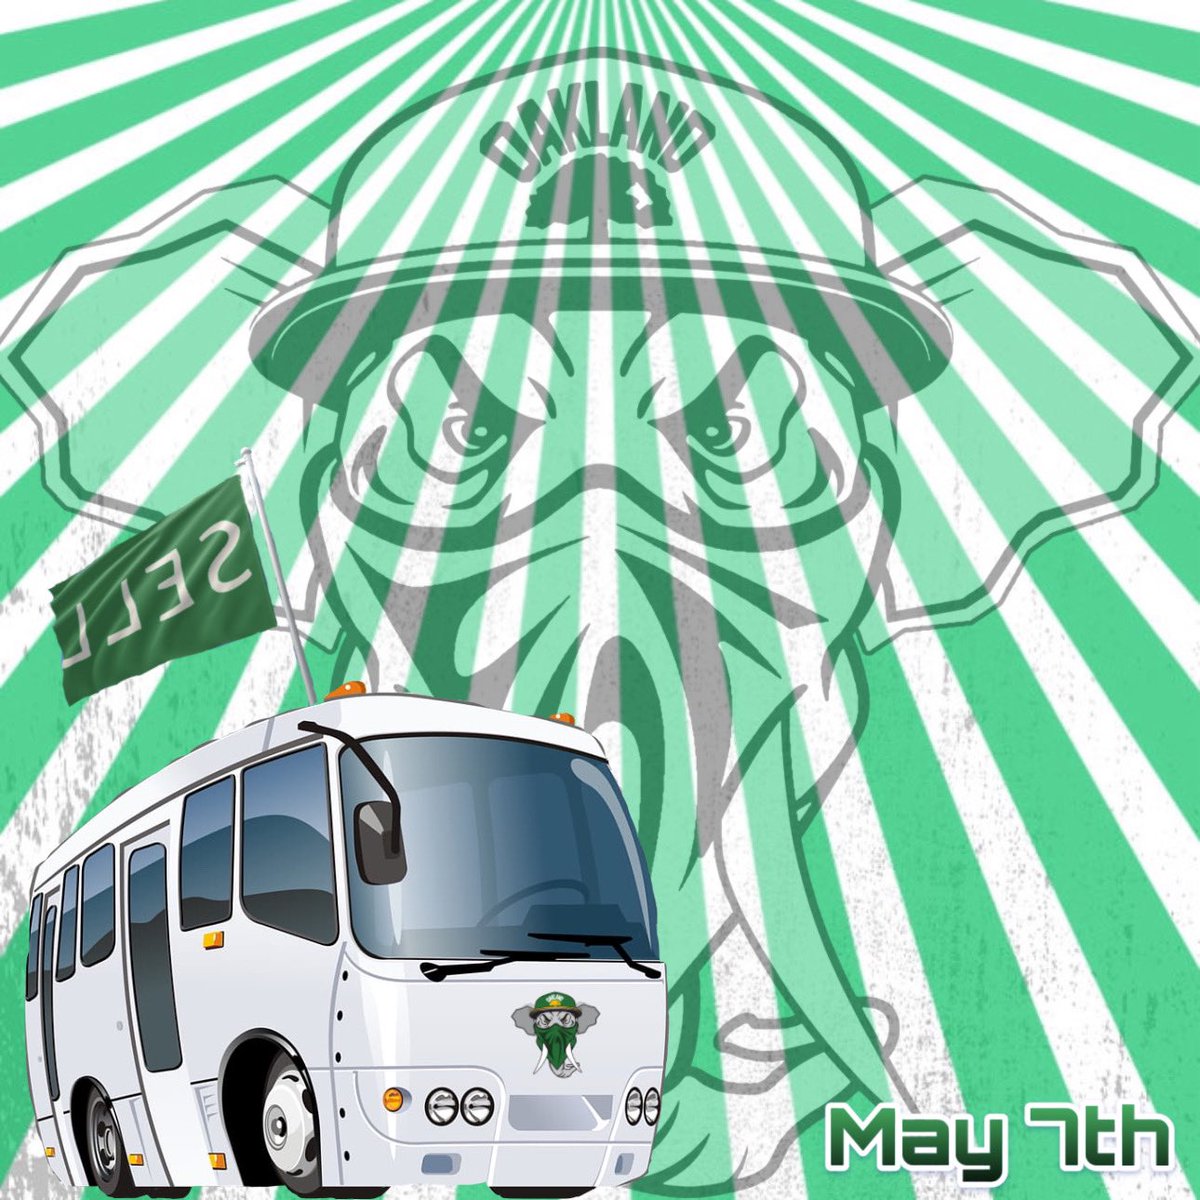 Need a SELL flag? Wanna haunt John Fisher? Get your tix to the 5/7 Roots Vs John Fisher’s Quakes via the @Oakland68s! Ride down to SJ in the 68’s party bus!!! You won’t wanna to miss this game!!!! 🔗 to tix here: oakland68s.org/shop